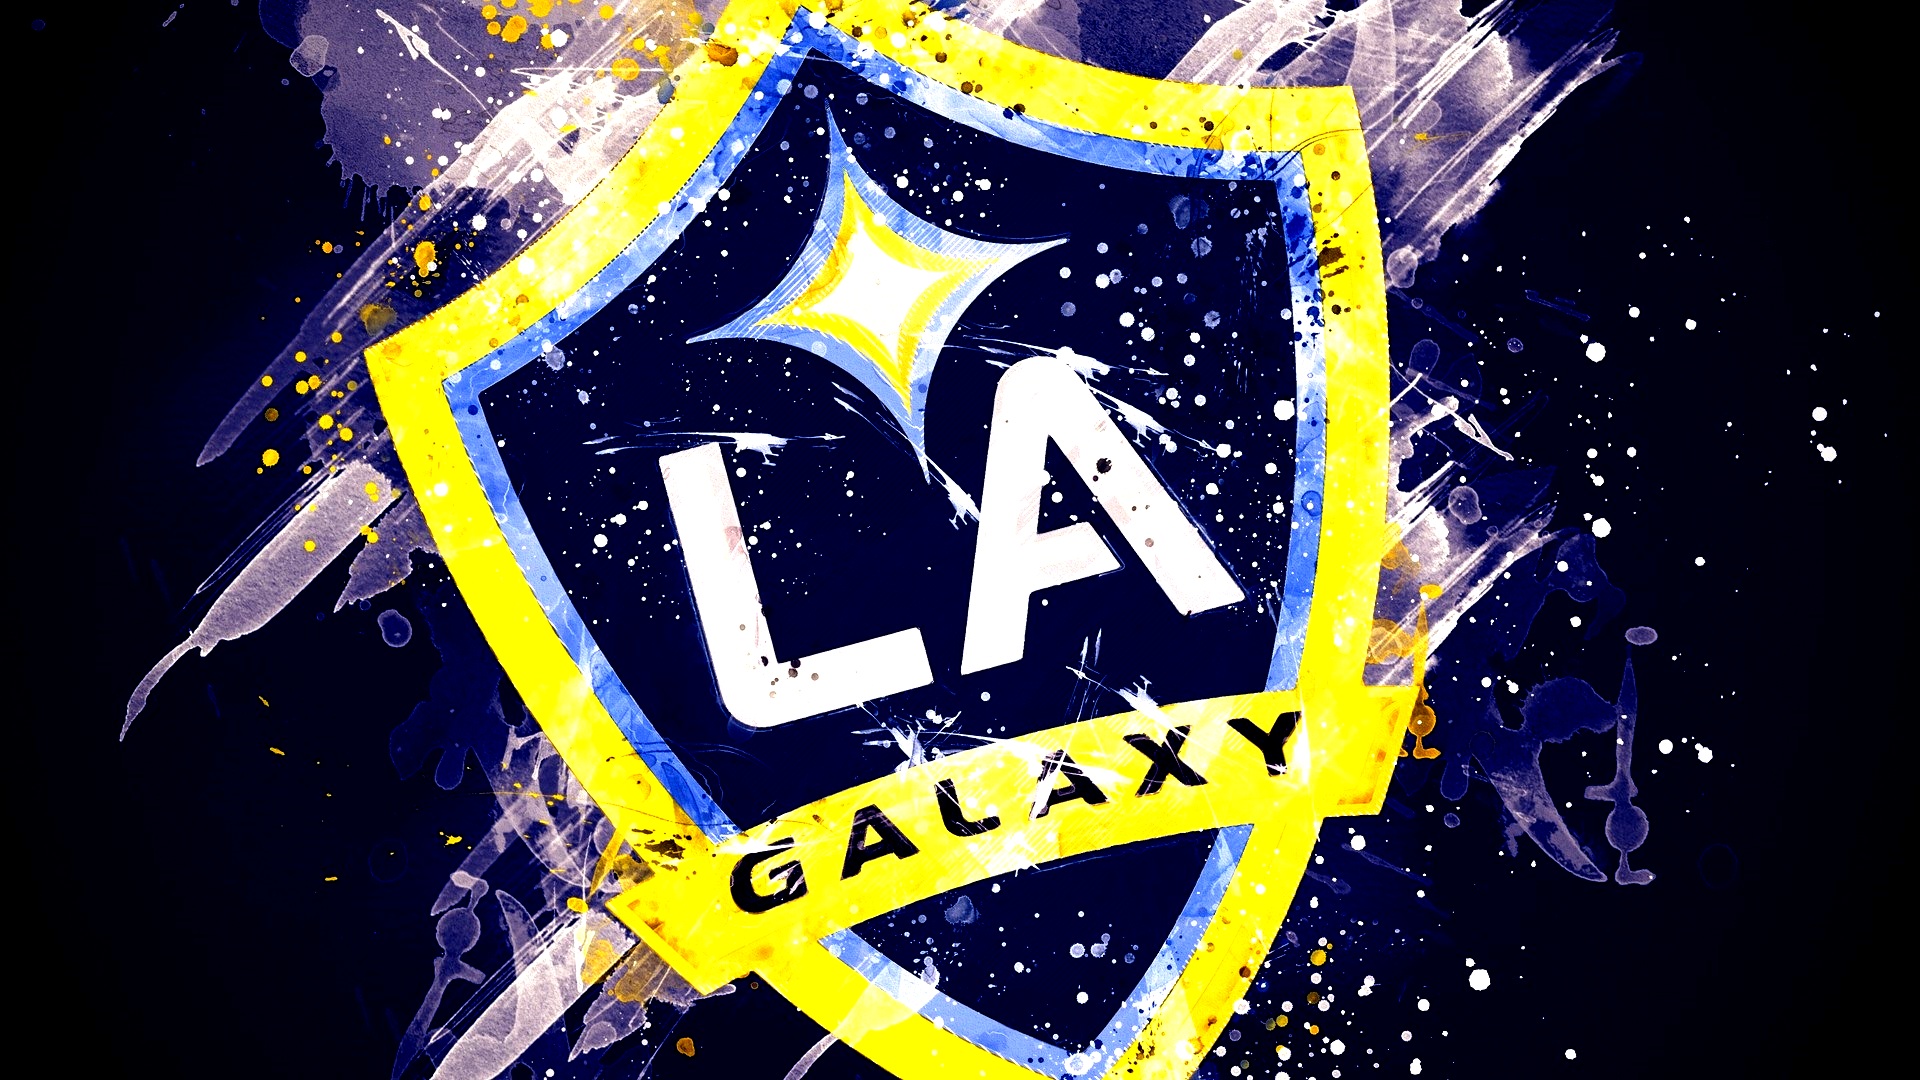 Los Angeles Galaxy HD Wallpapers With high-resolution 1920X1080 pixel. You can use this wallpaper for your Desktop Computers, Mac Screensavers, Windows Backgrounds, iPhone Wallpapers, Tablet or Android Lock screen and another Mobile device